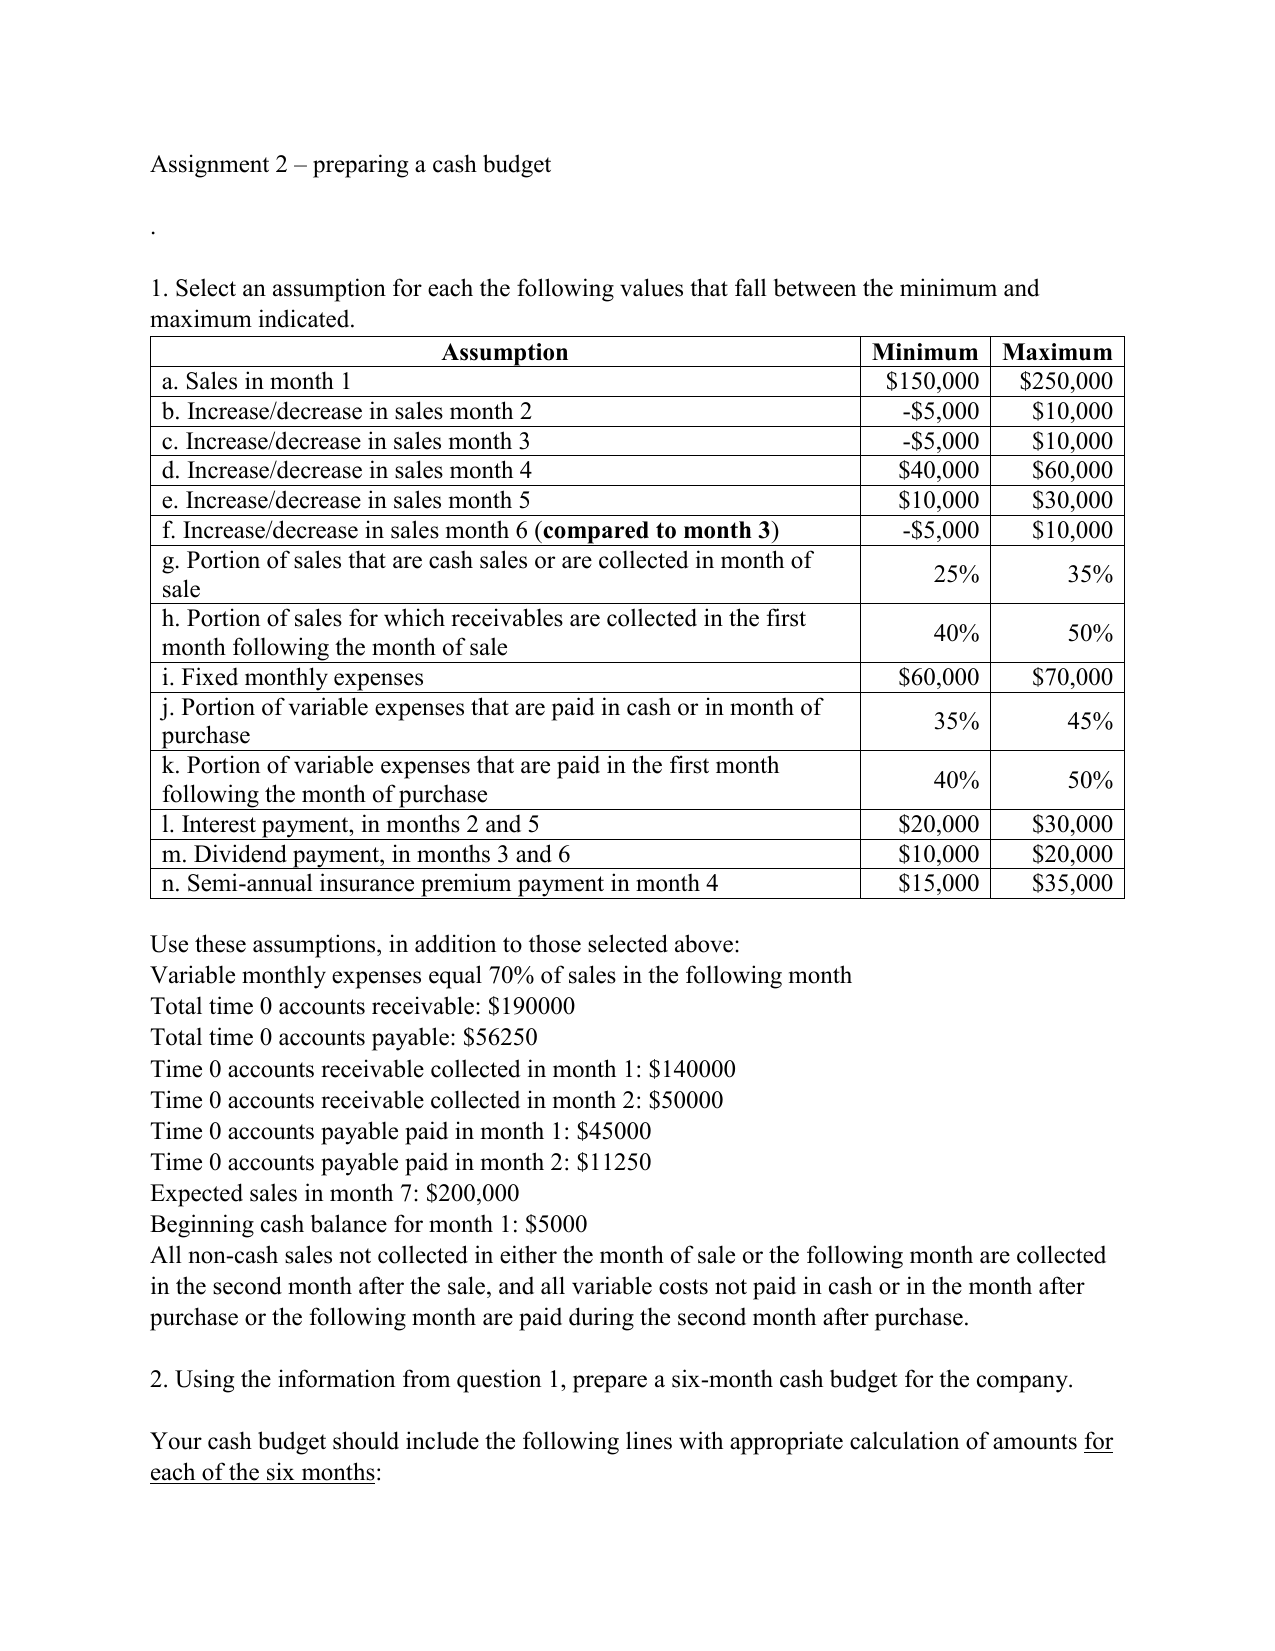 assignment budget promotion money and penalty influence